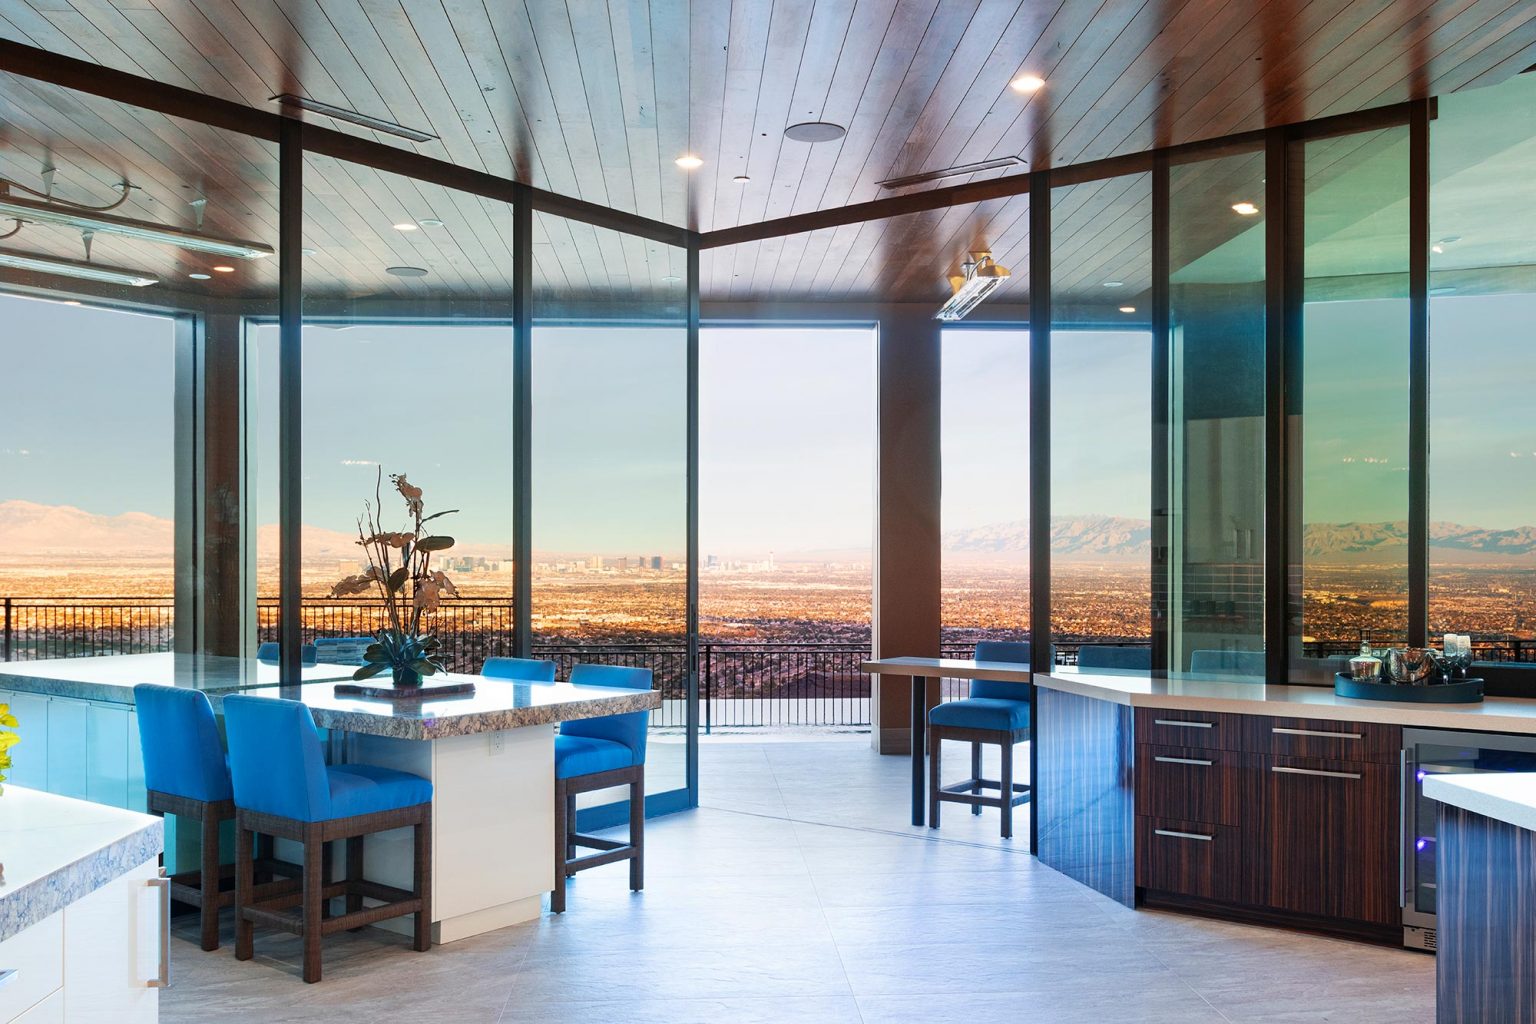 Sliding & Multi-Slide Doors are opened in plush living room space to see a vista of downtown